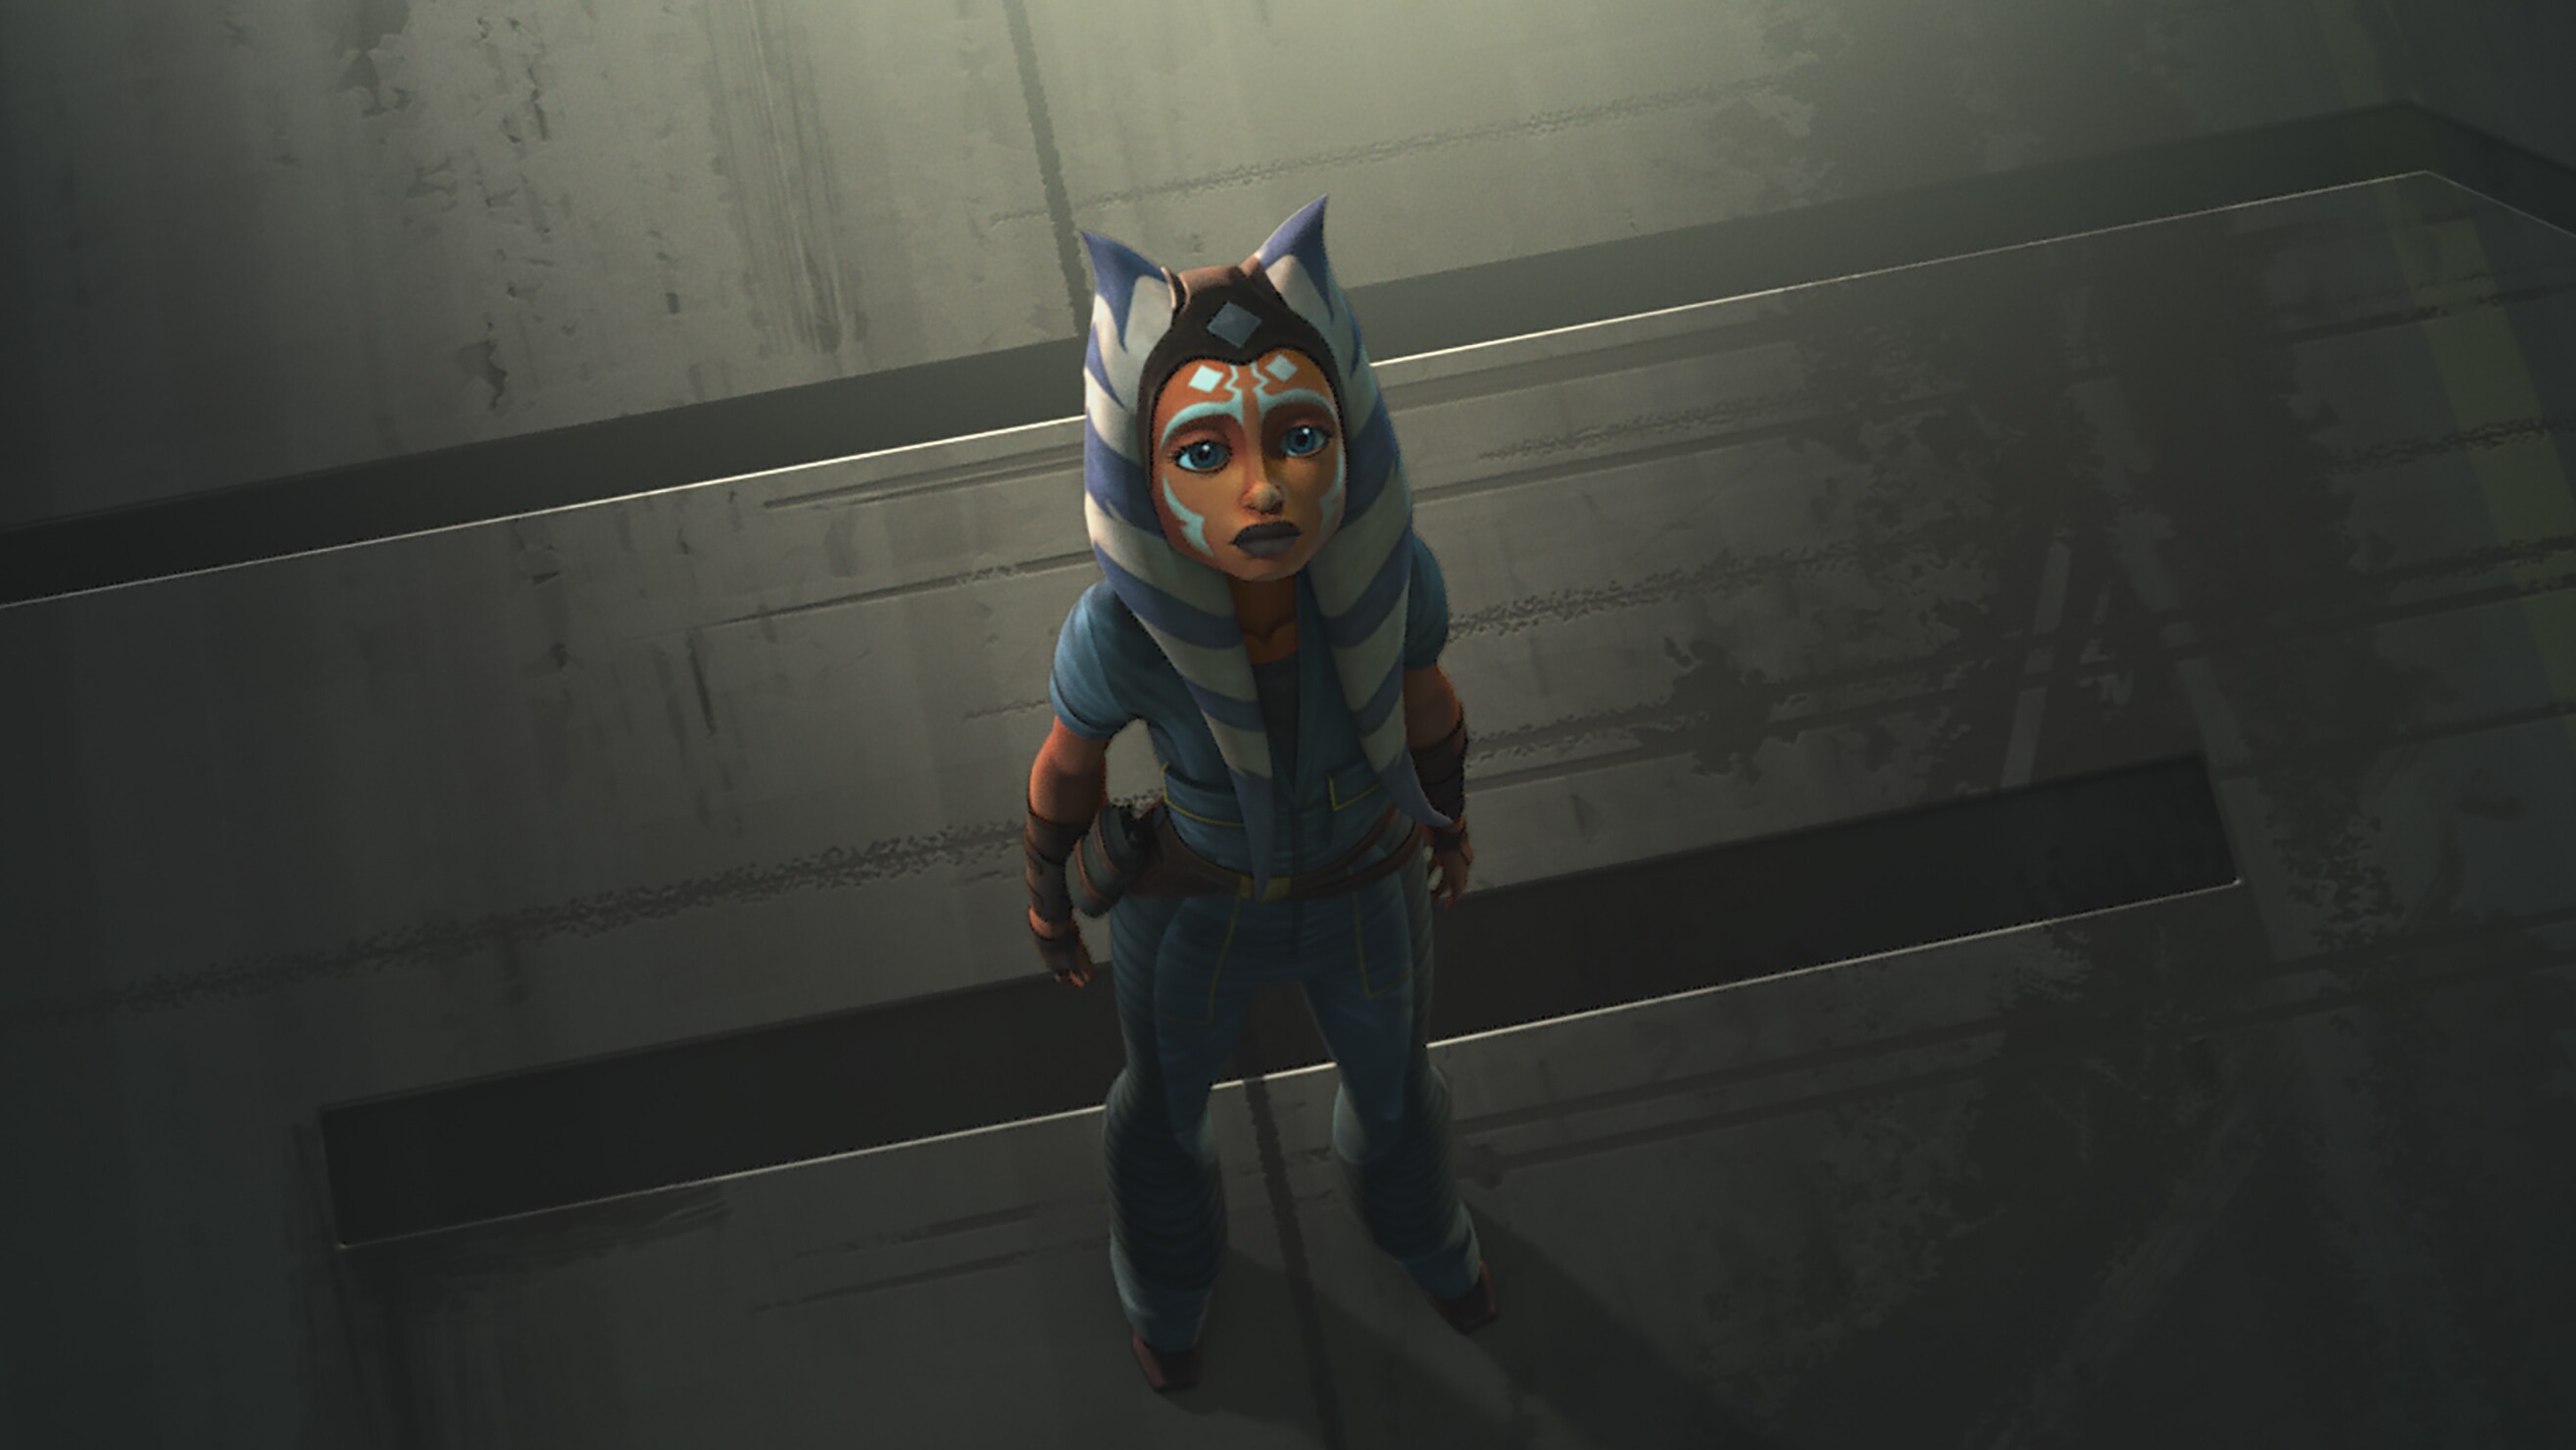 Ahsoka Tano finds herself stranded in the underworld of Coruscant in STAR WARS: THE CLONE WARS, exclusively on Disney+.